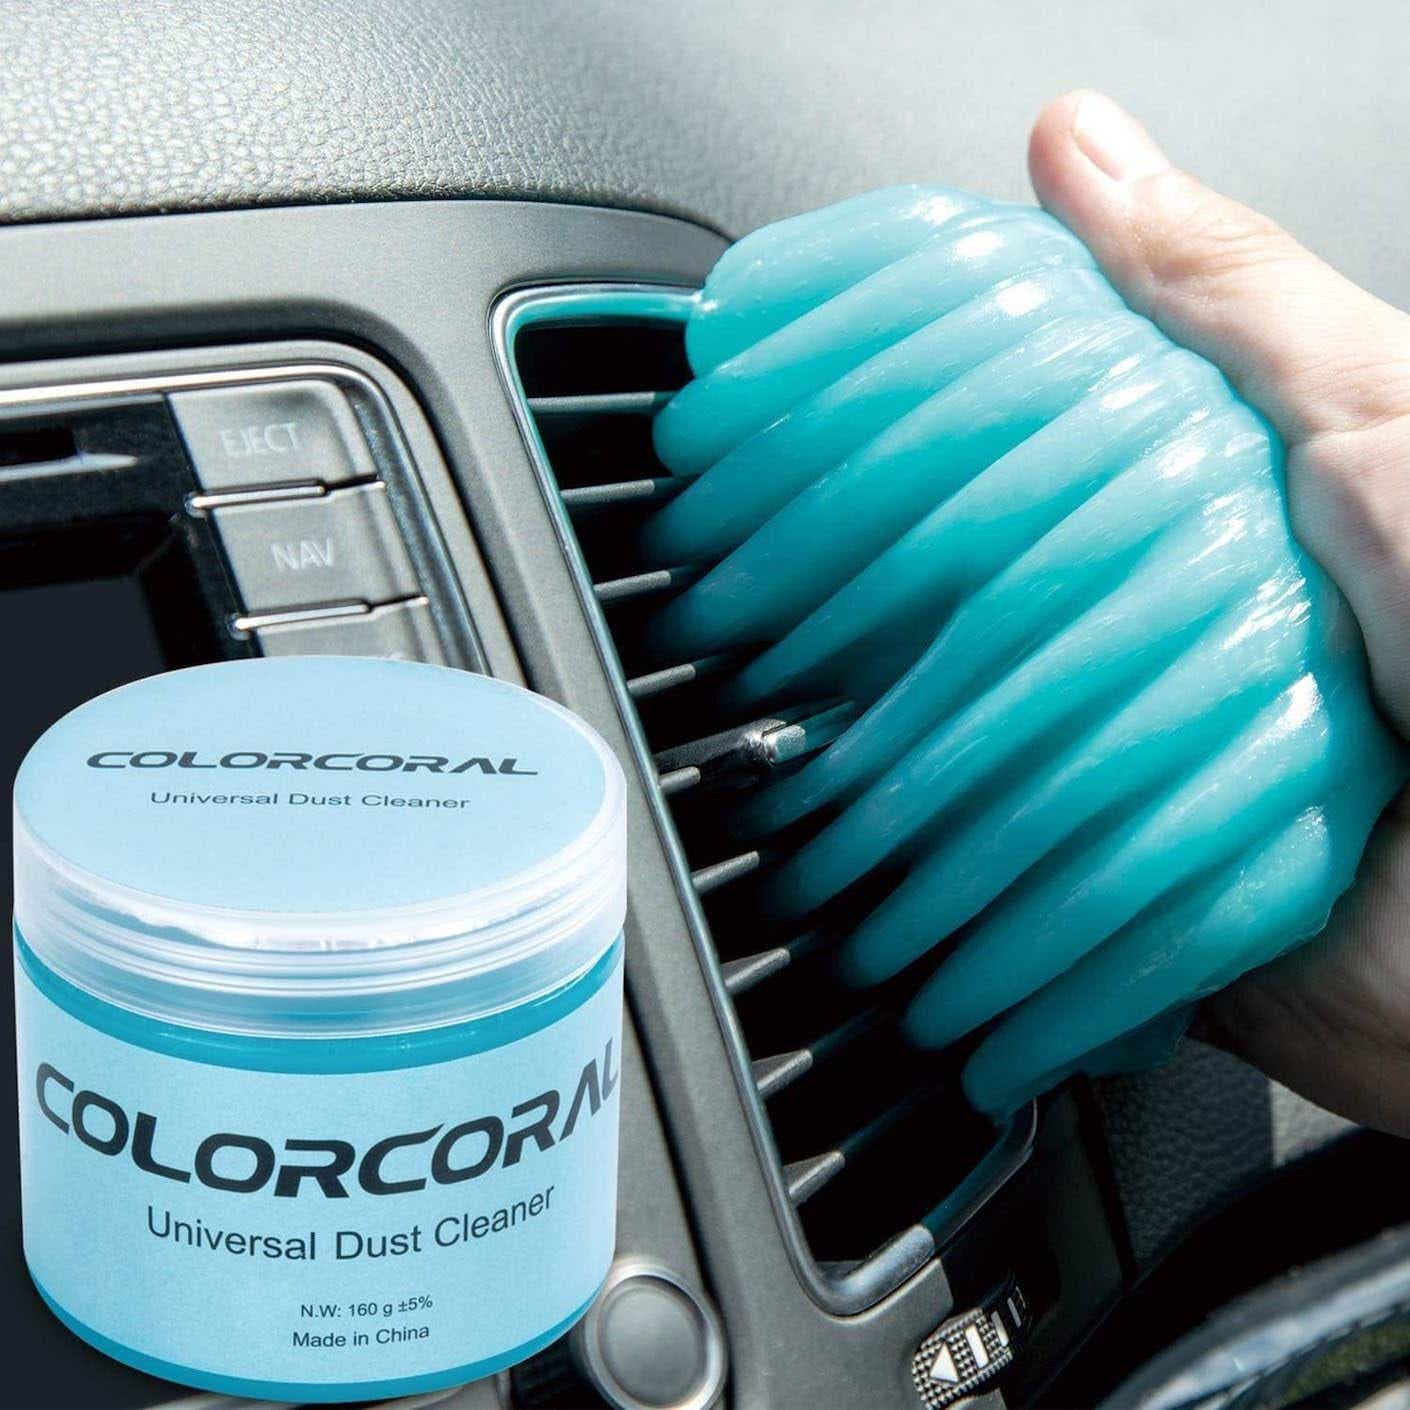 Make dusting a doddle with this £3.49 buy that's going viral on TikTok